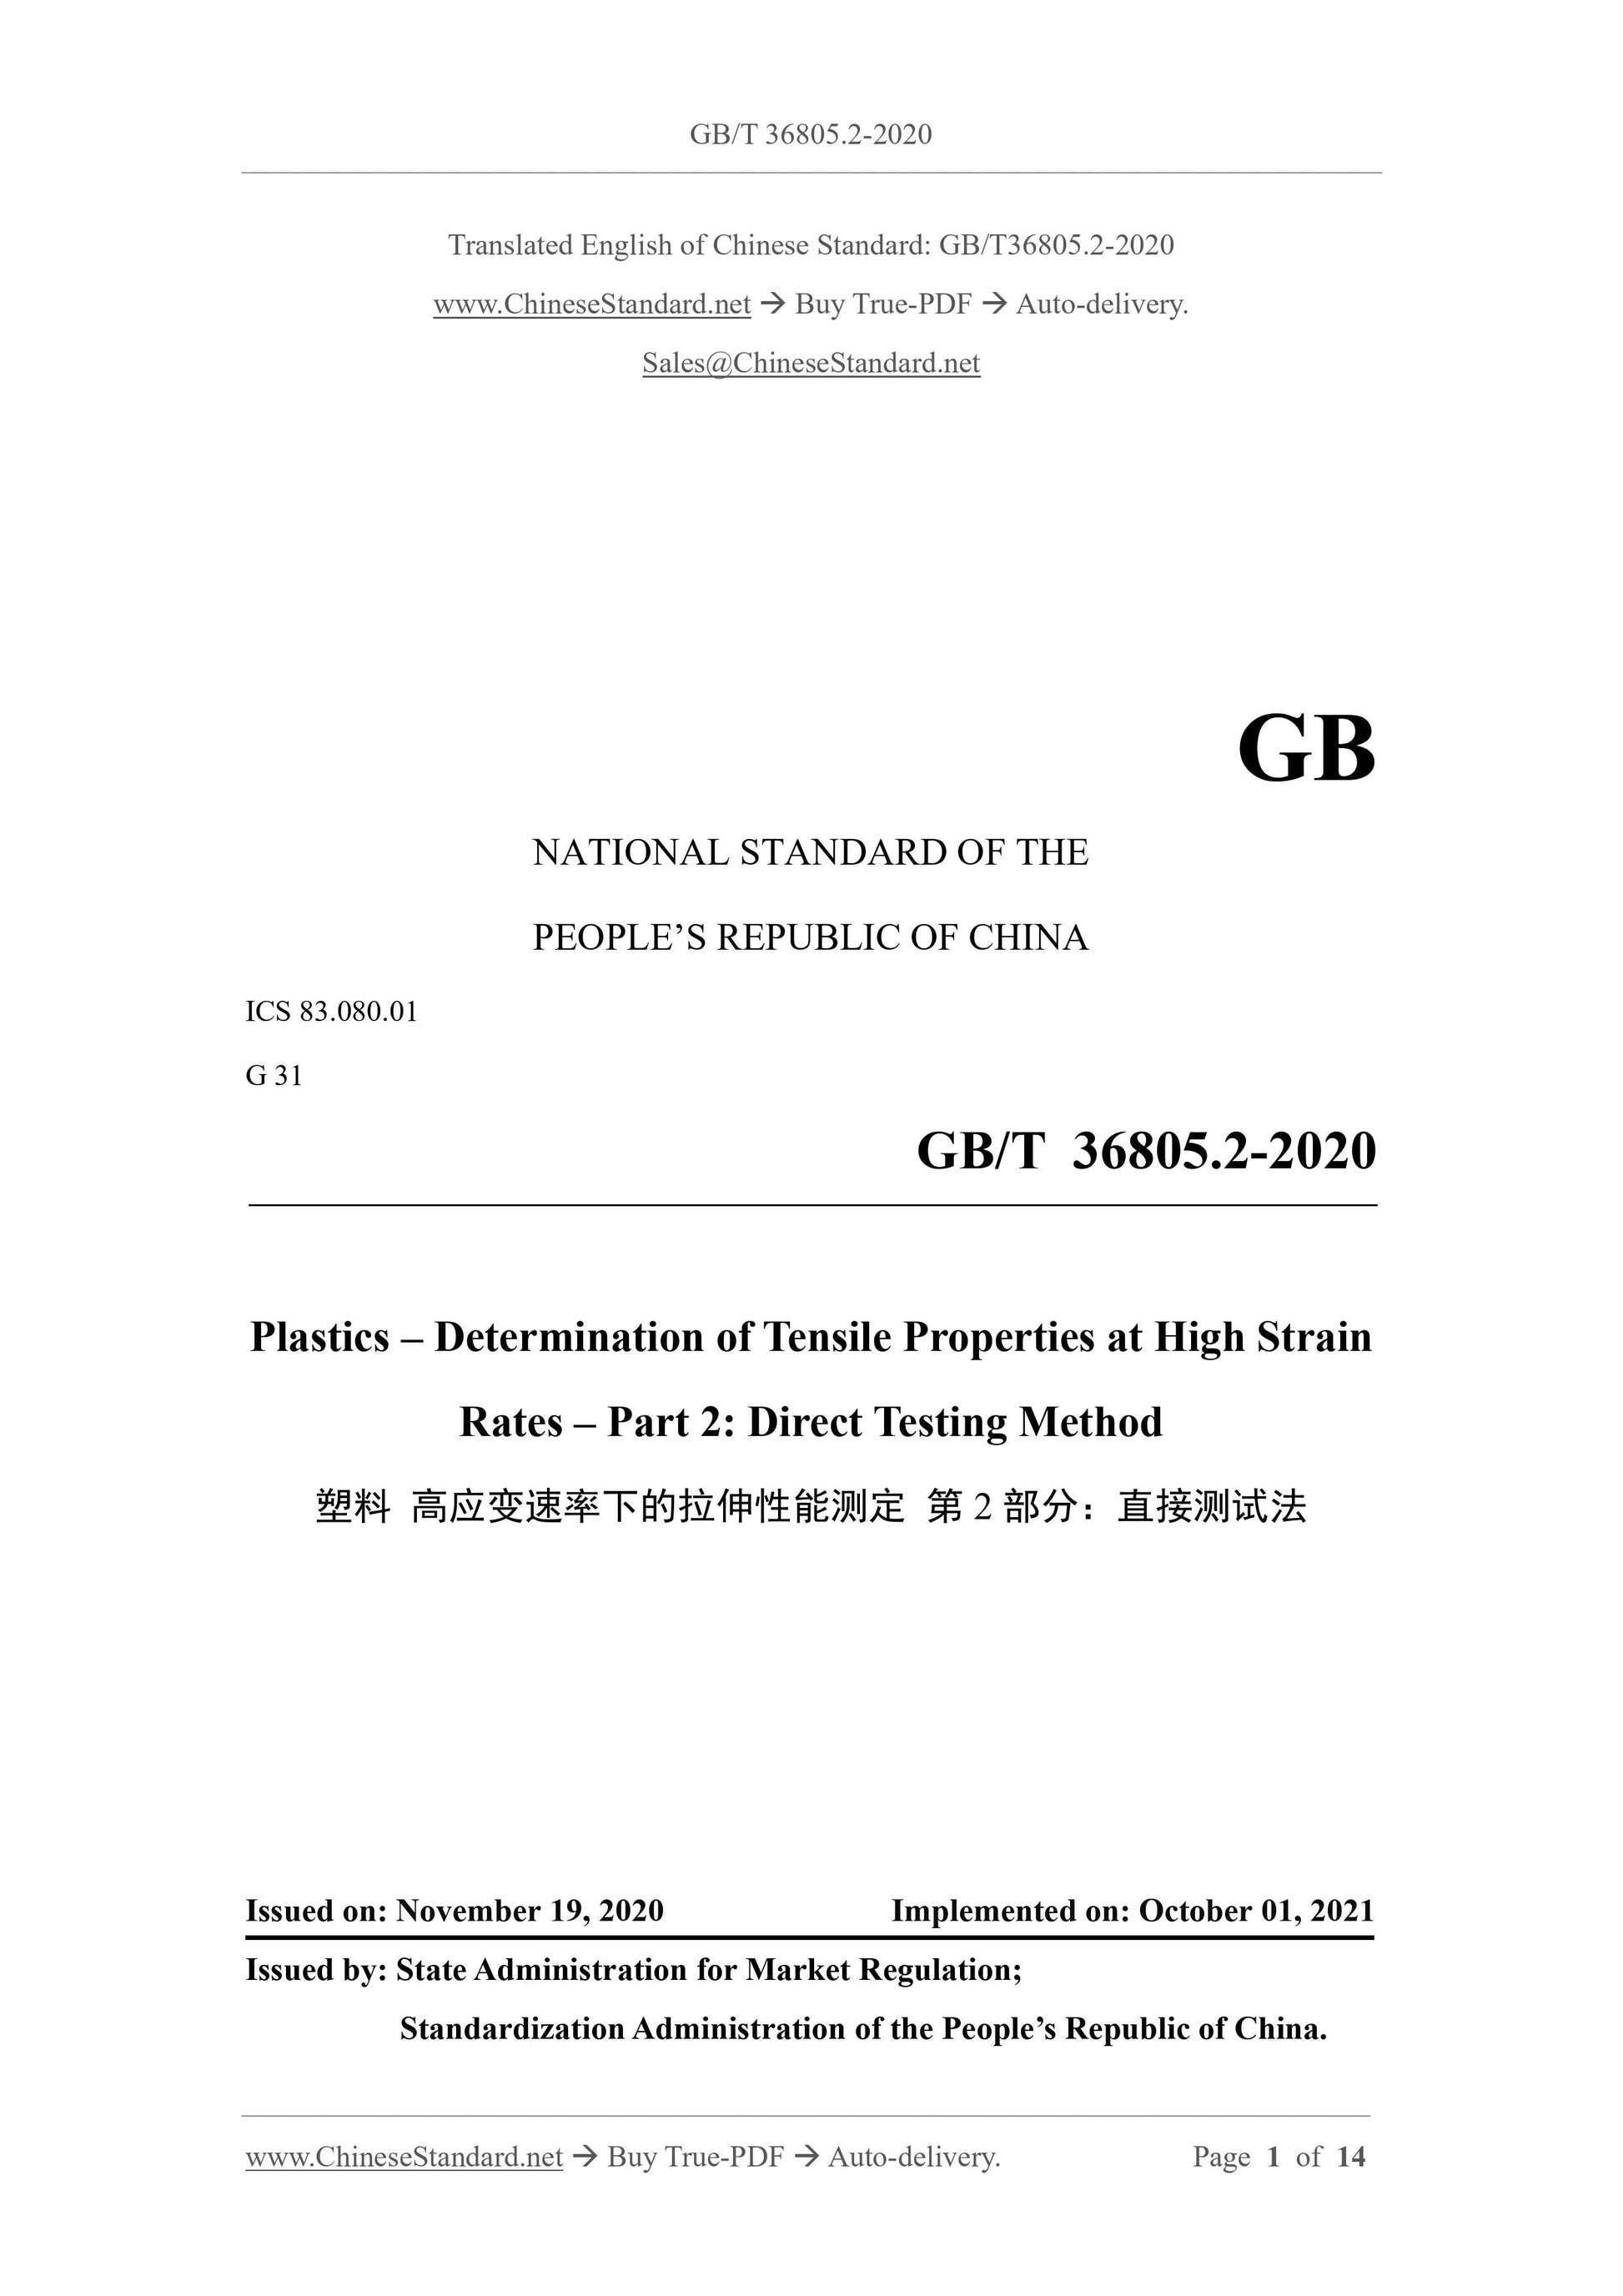 GB/T 36805.2-2020 Page 1